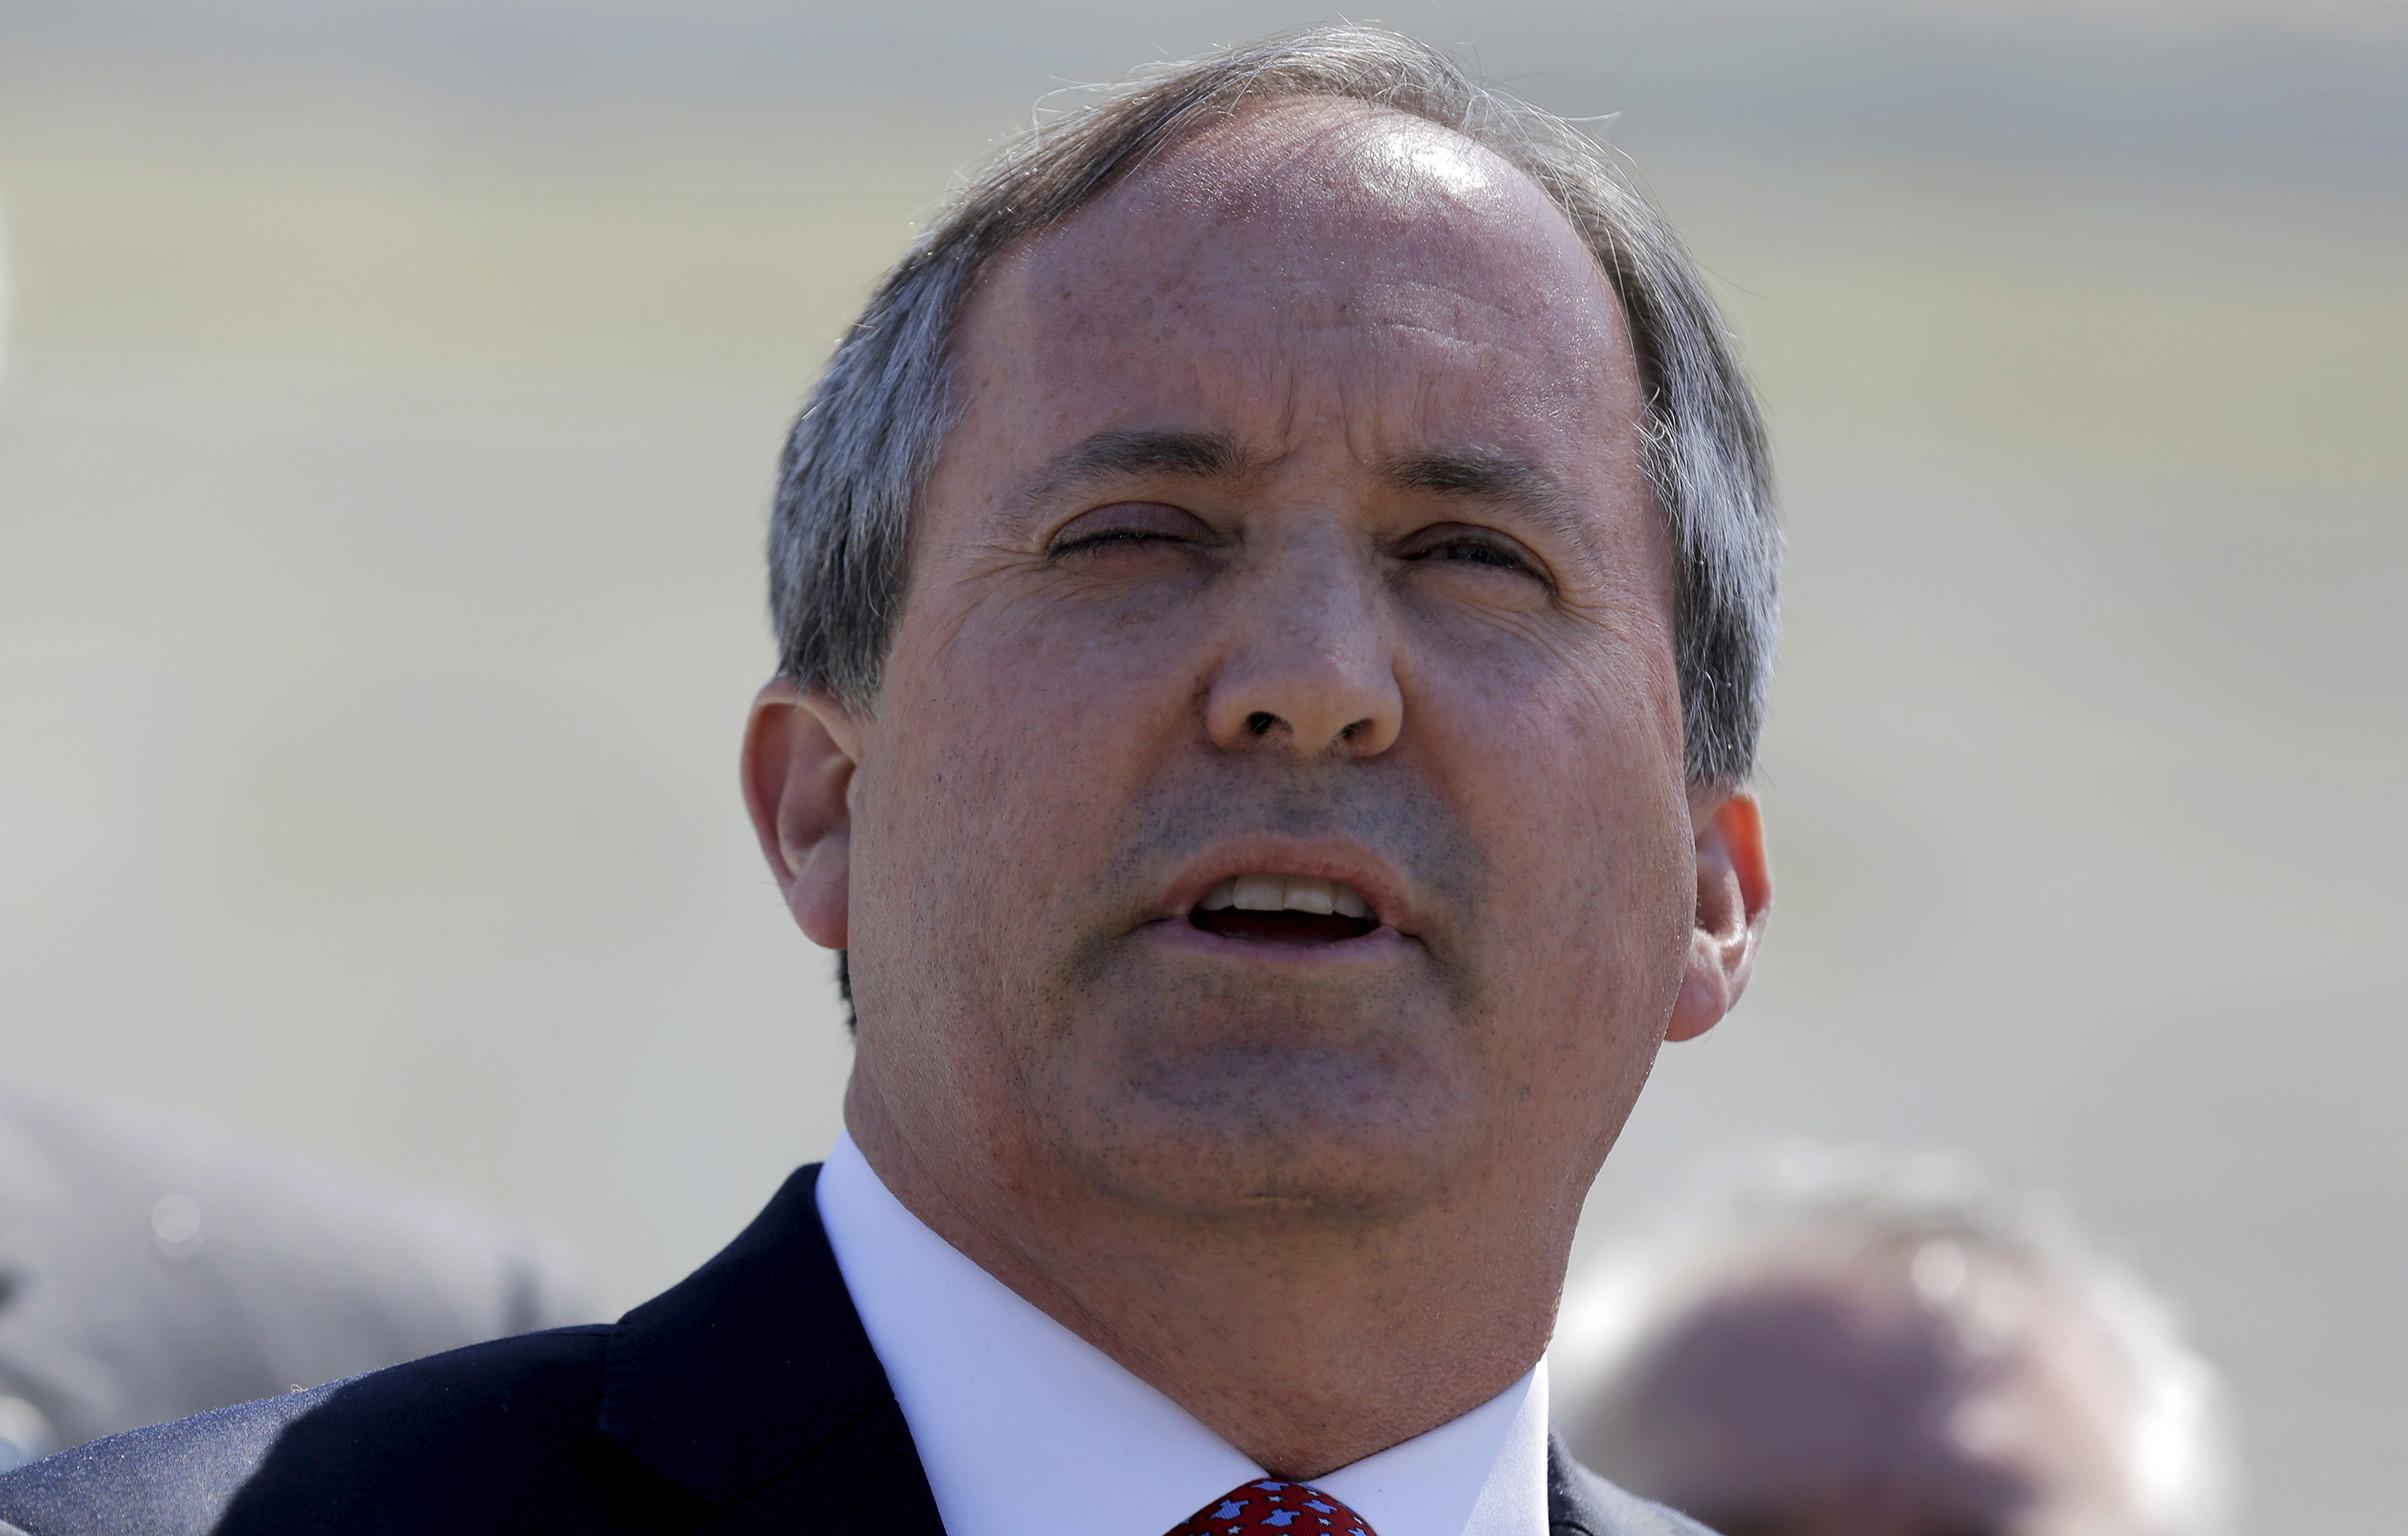 Texas AG Ken Paxton has sued the Biden administration over its freeze on deportations